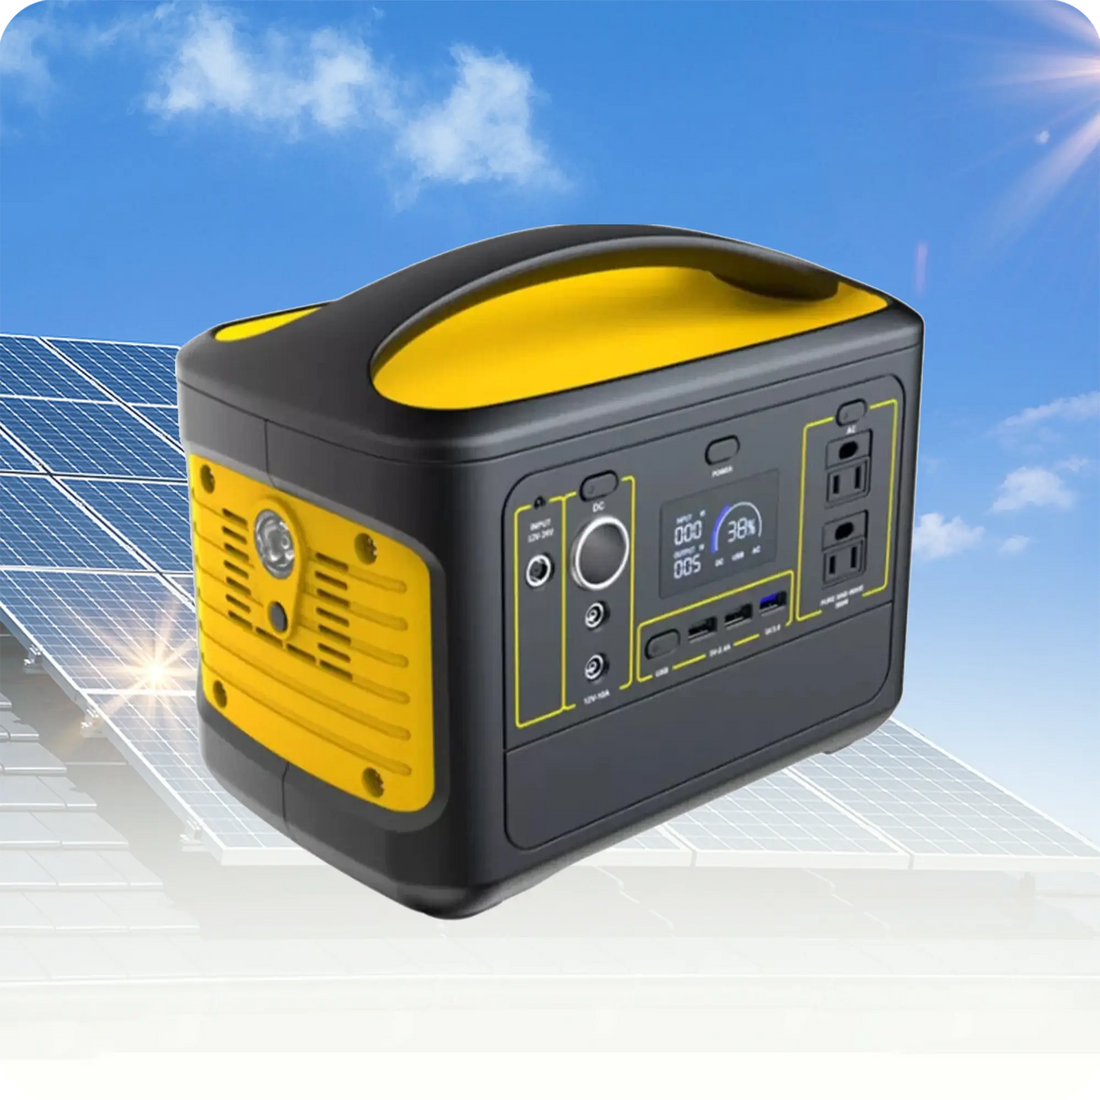 153Wh Portable Power Bank Station Solar Generator Lithium Battery Backup Supply 